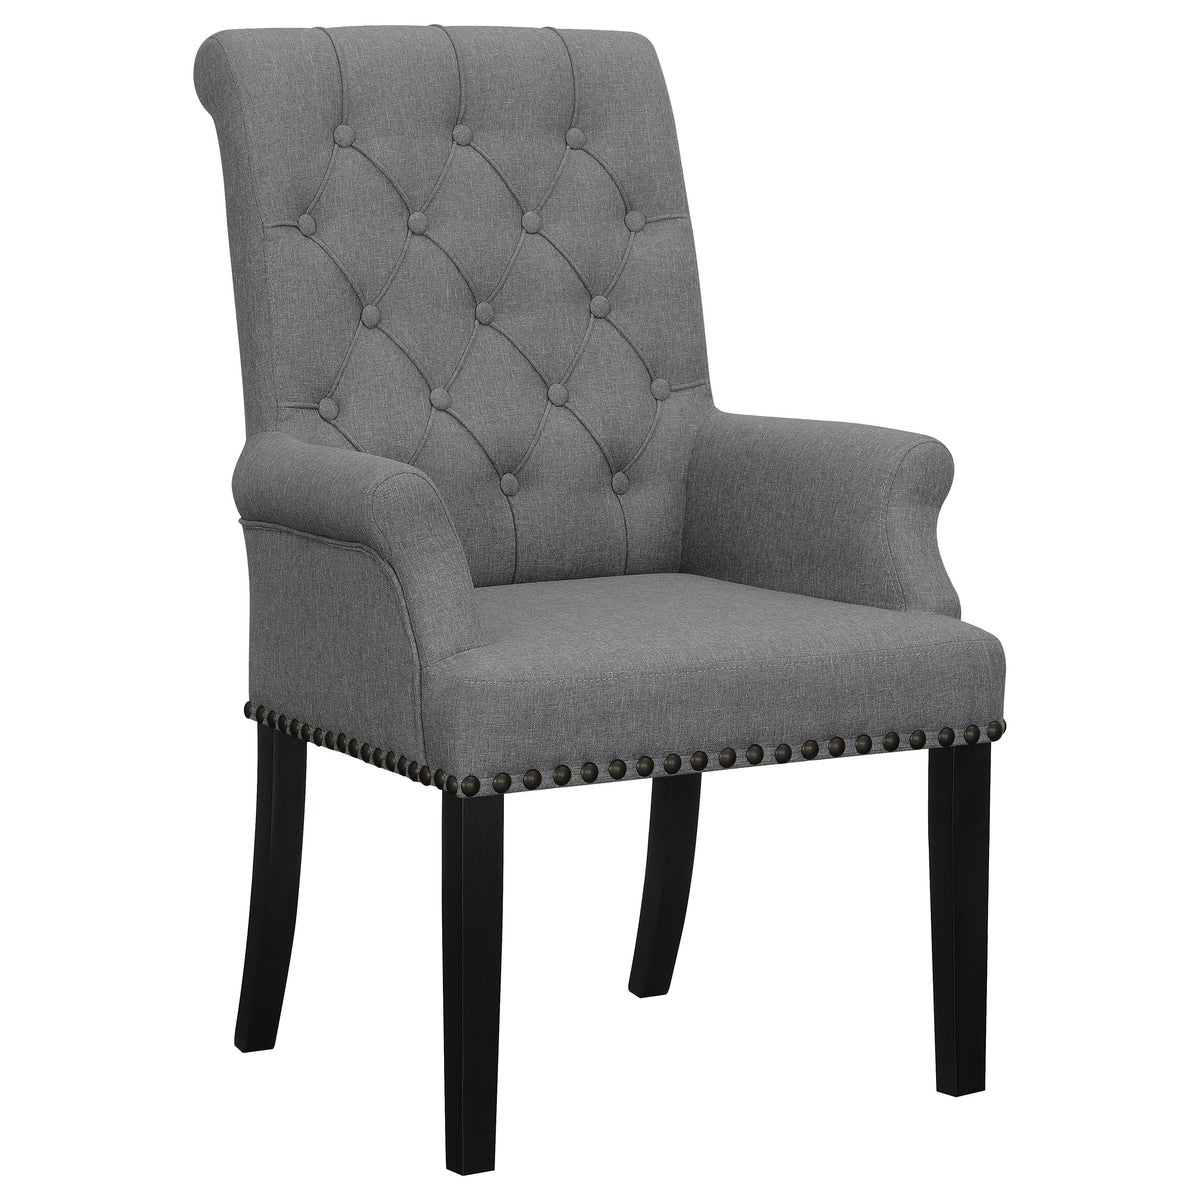 Alana Upholstered Tufted Arm Chair with Nailhead Trim  Half Price Furniture